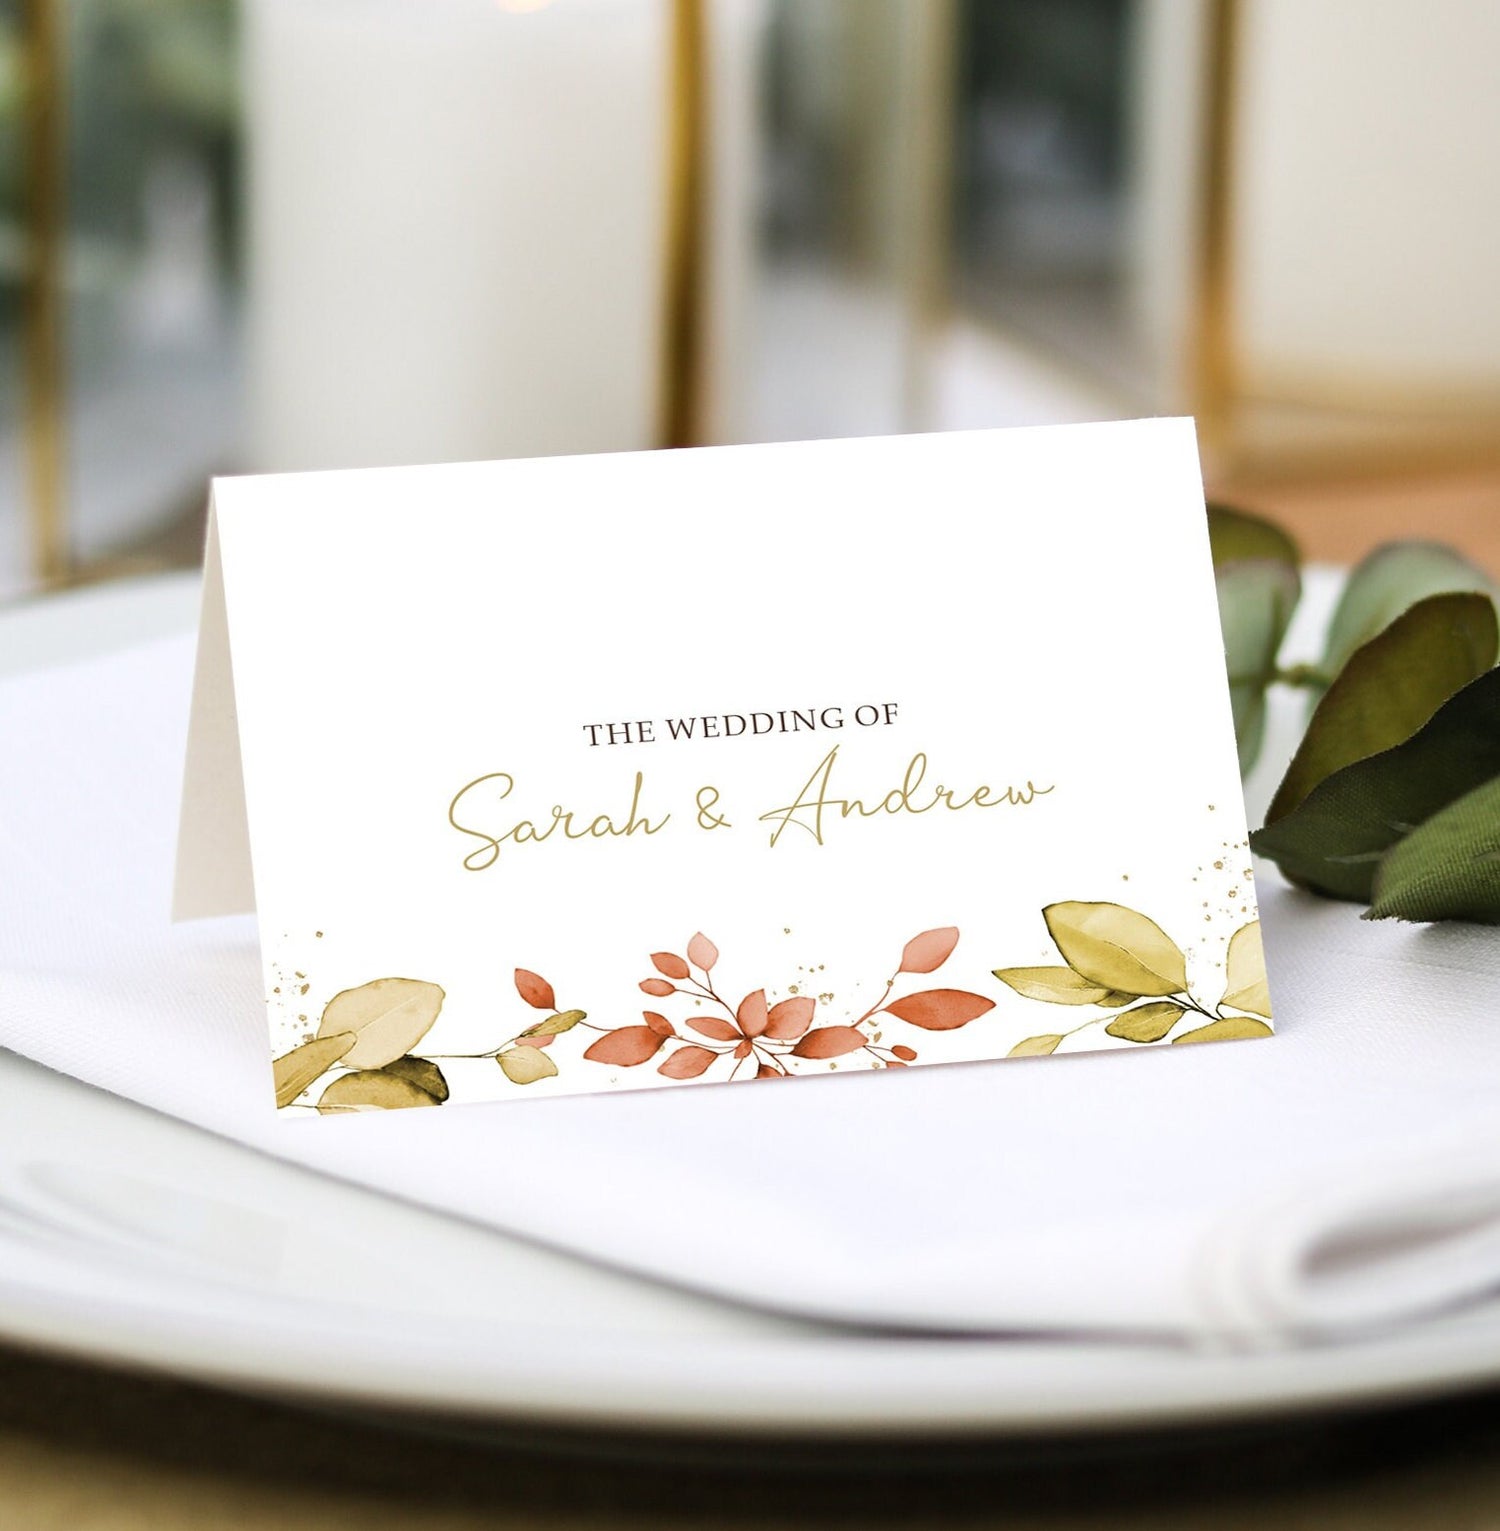 Eucalyptus autumn place cards with menu choices - place settings